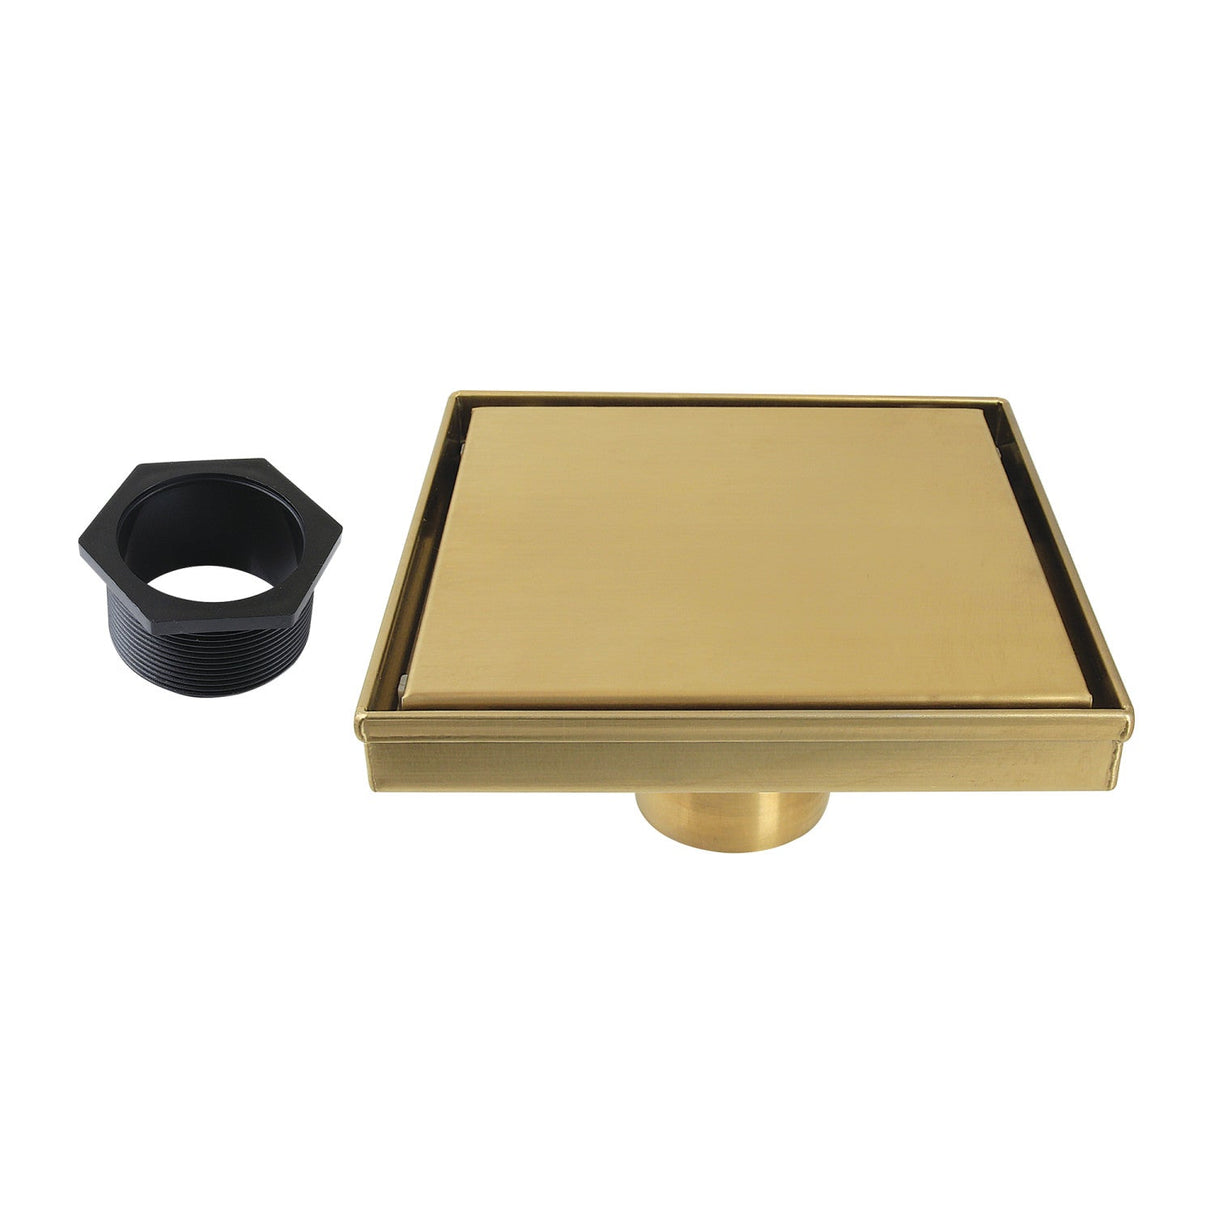 Watercourse BSF6627 6-Inch Stainless Steel Square Shower Drain, Brushed Brass